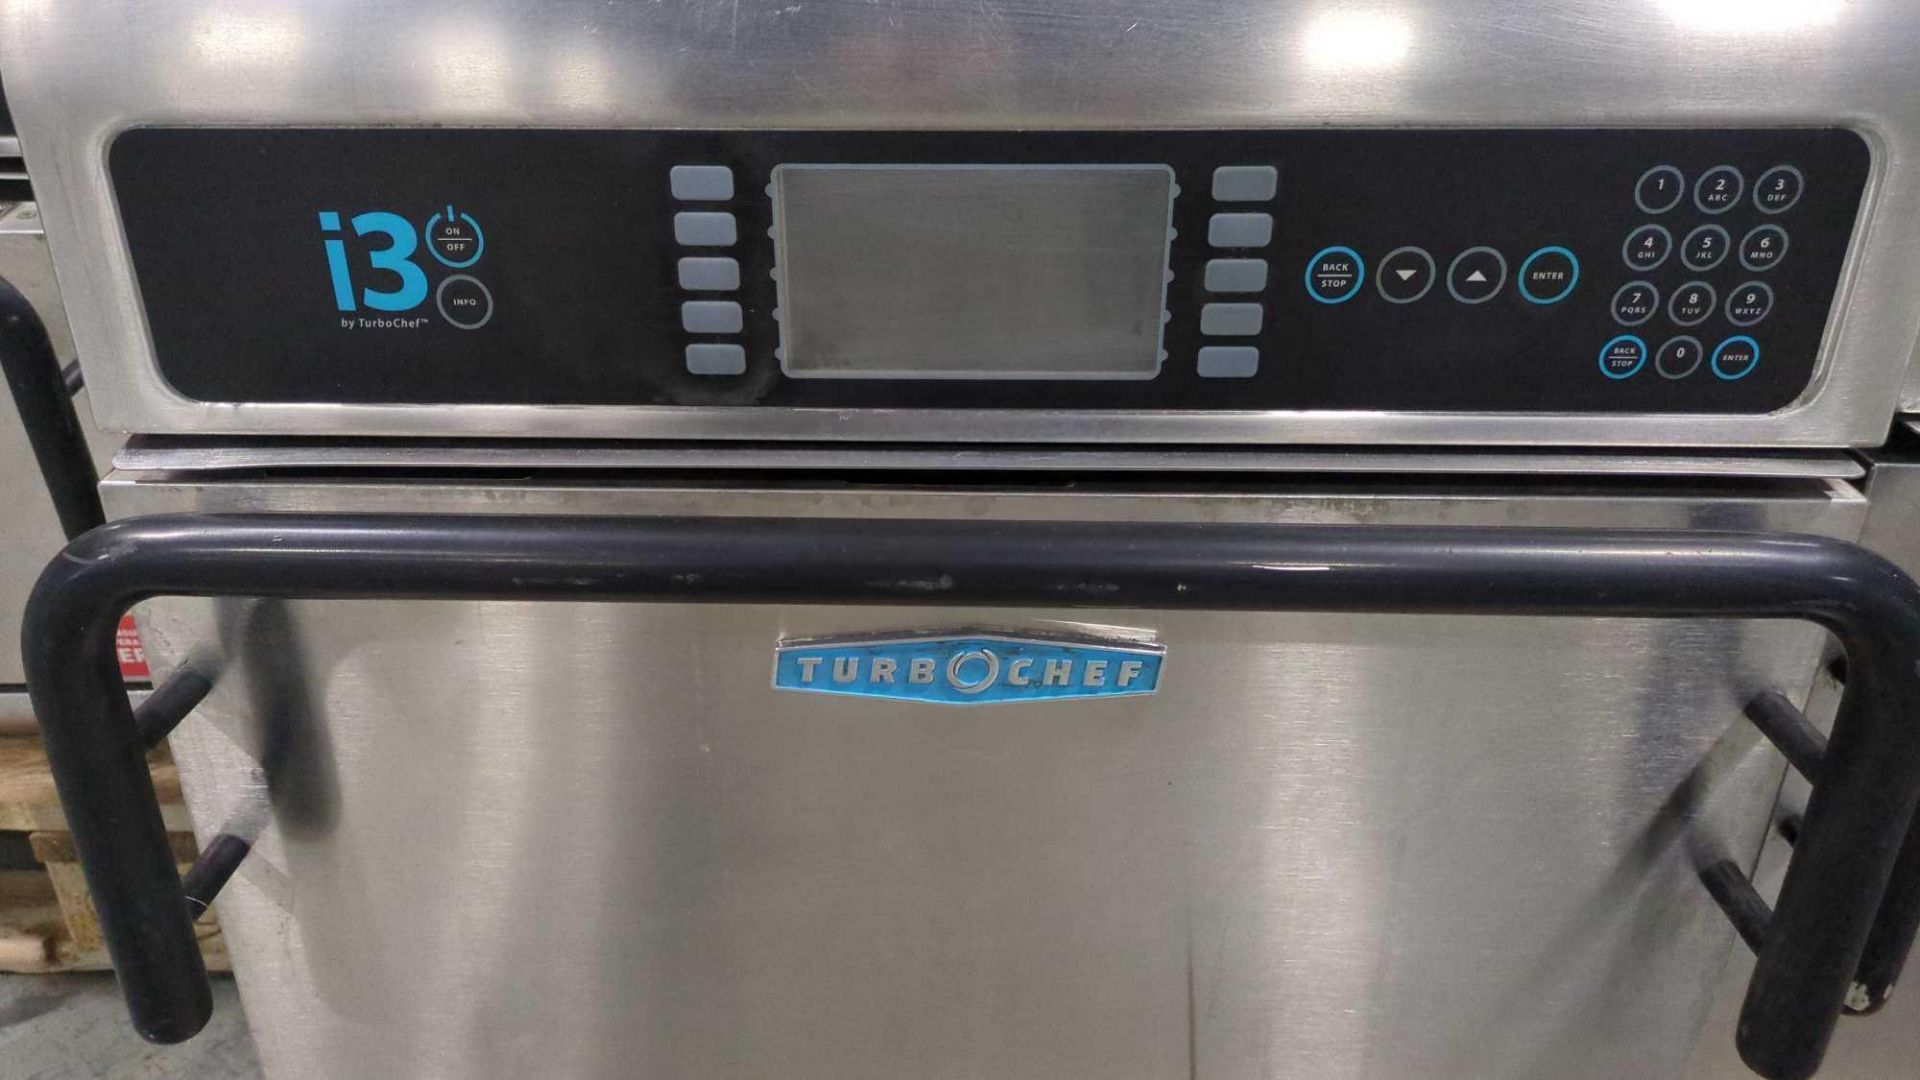 Turbo chef i3 pizza oven - Image 2 of 4